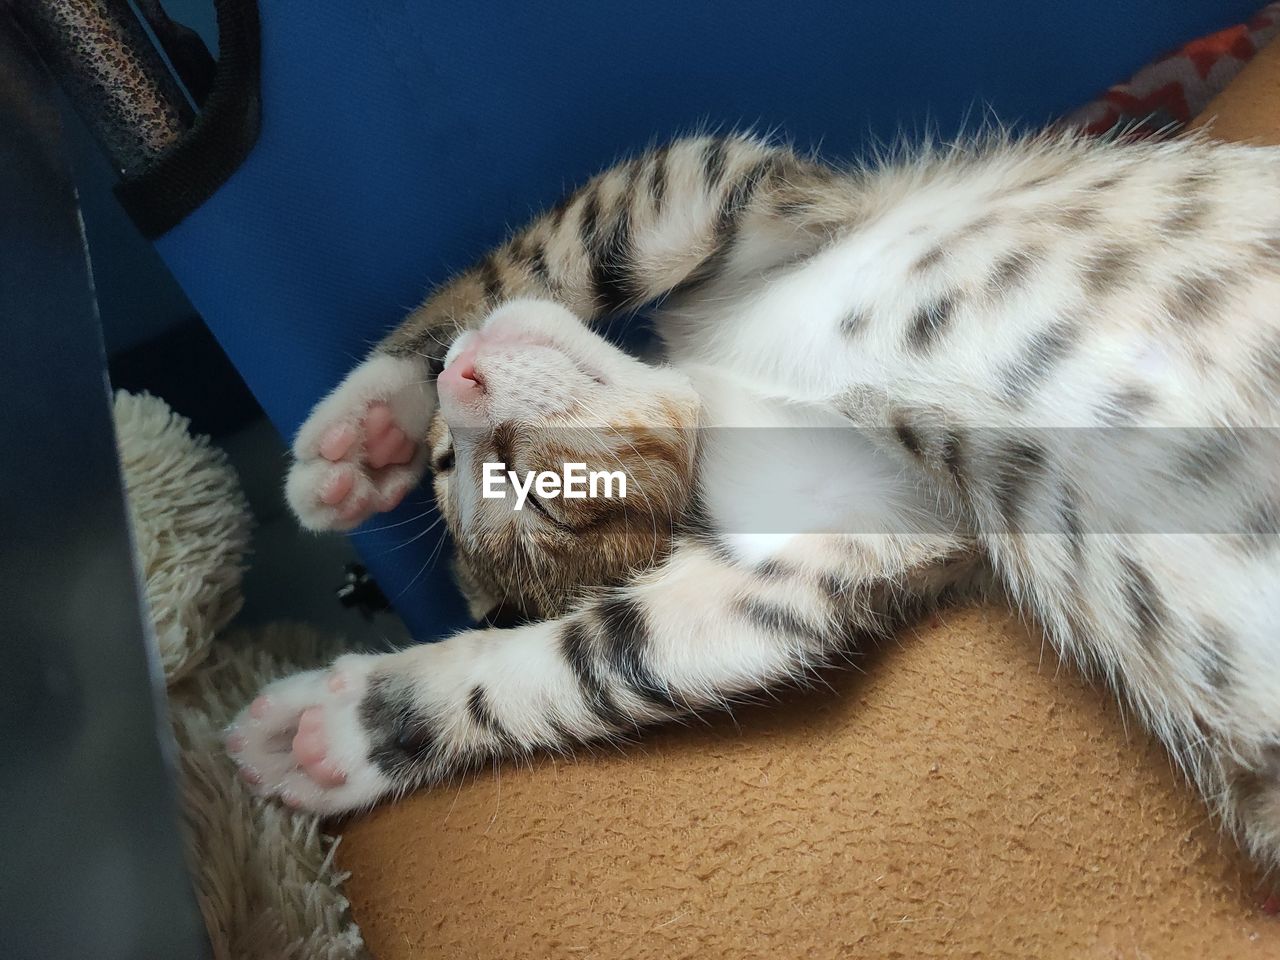 CLOSE-UP OF A CAT SLEEPING ON A BLANKET